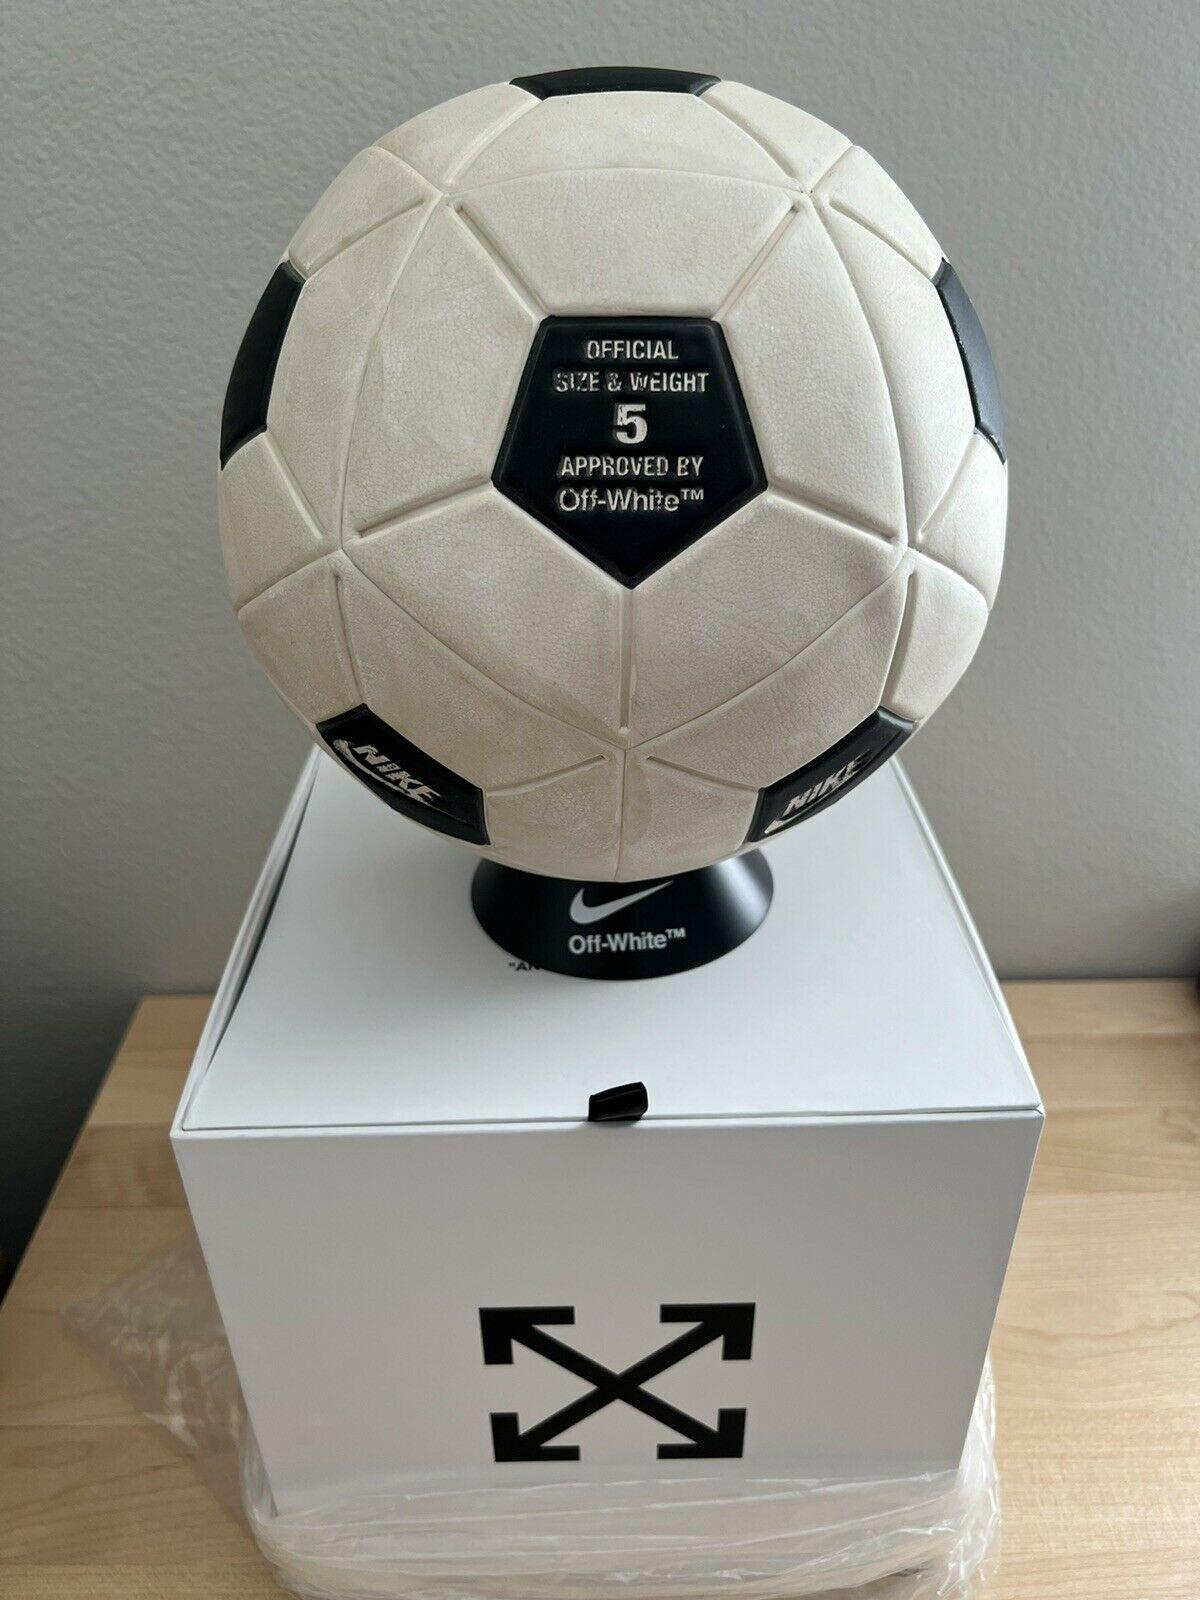 Off White Magia Soccer Ball Produced by Nike designed by Virgil Abloh - Sculpture by Off White / Virgil Abloh